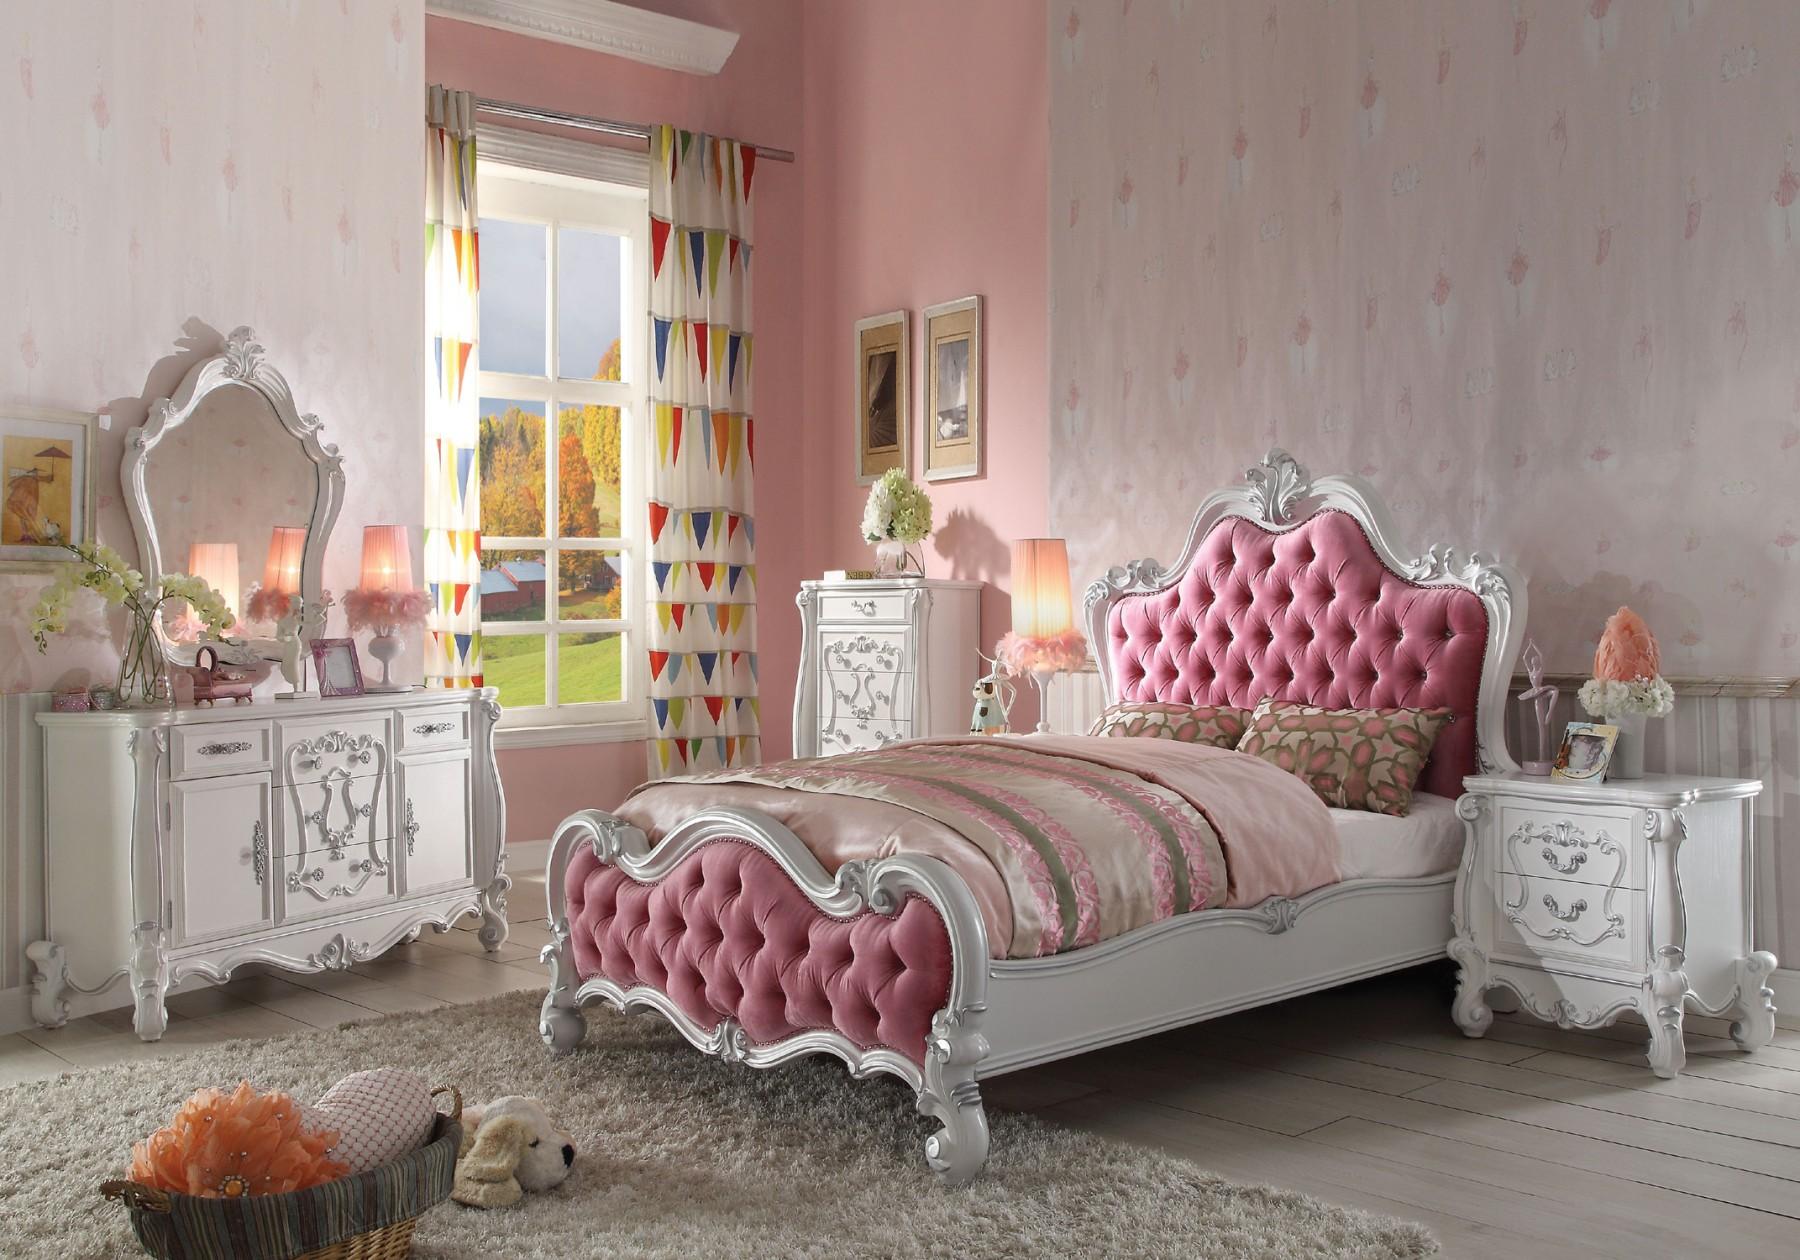 

    
Soflex Classic Andria Kids Full Bedroom Set 5Pcs Antique White Pink Upholstery
